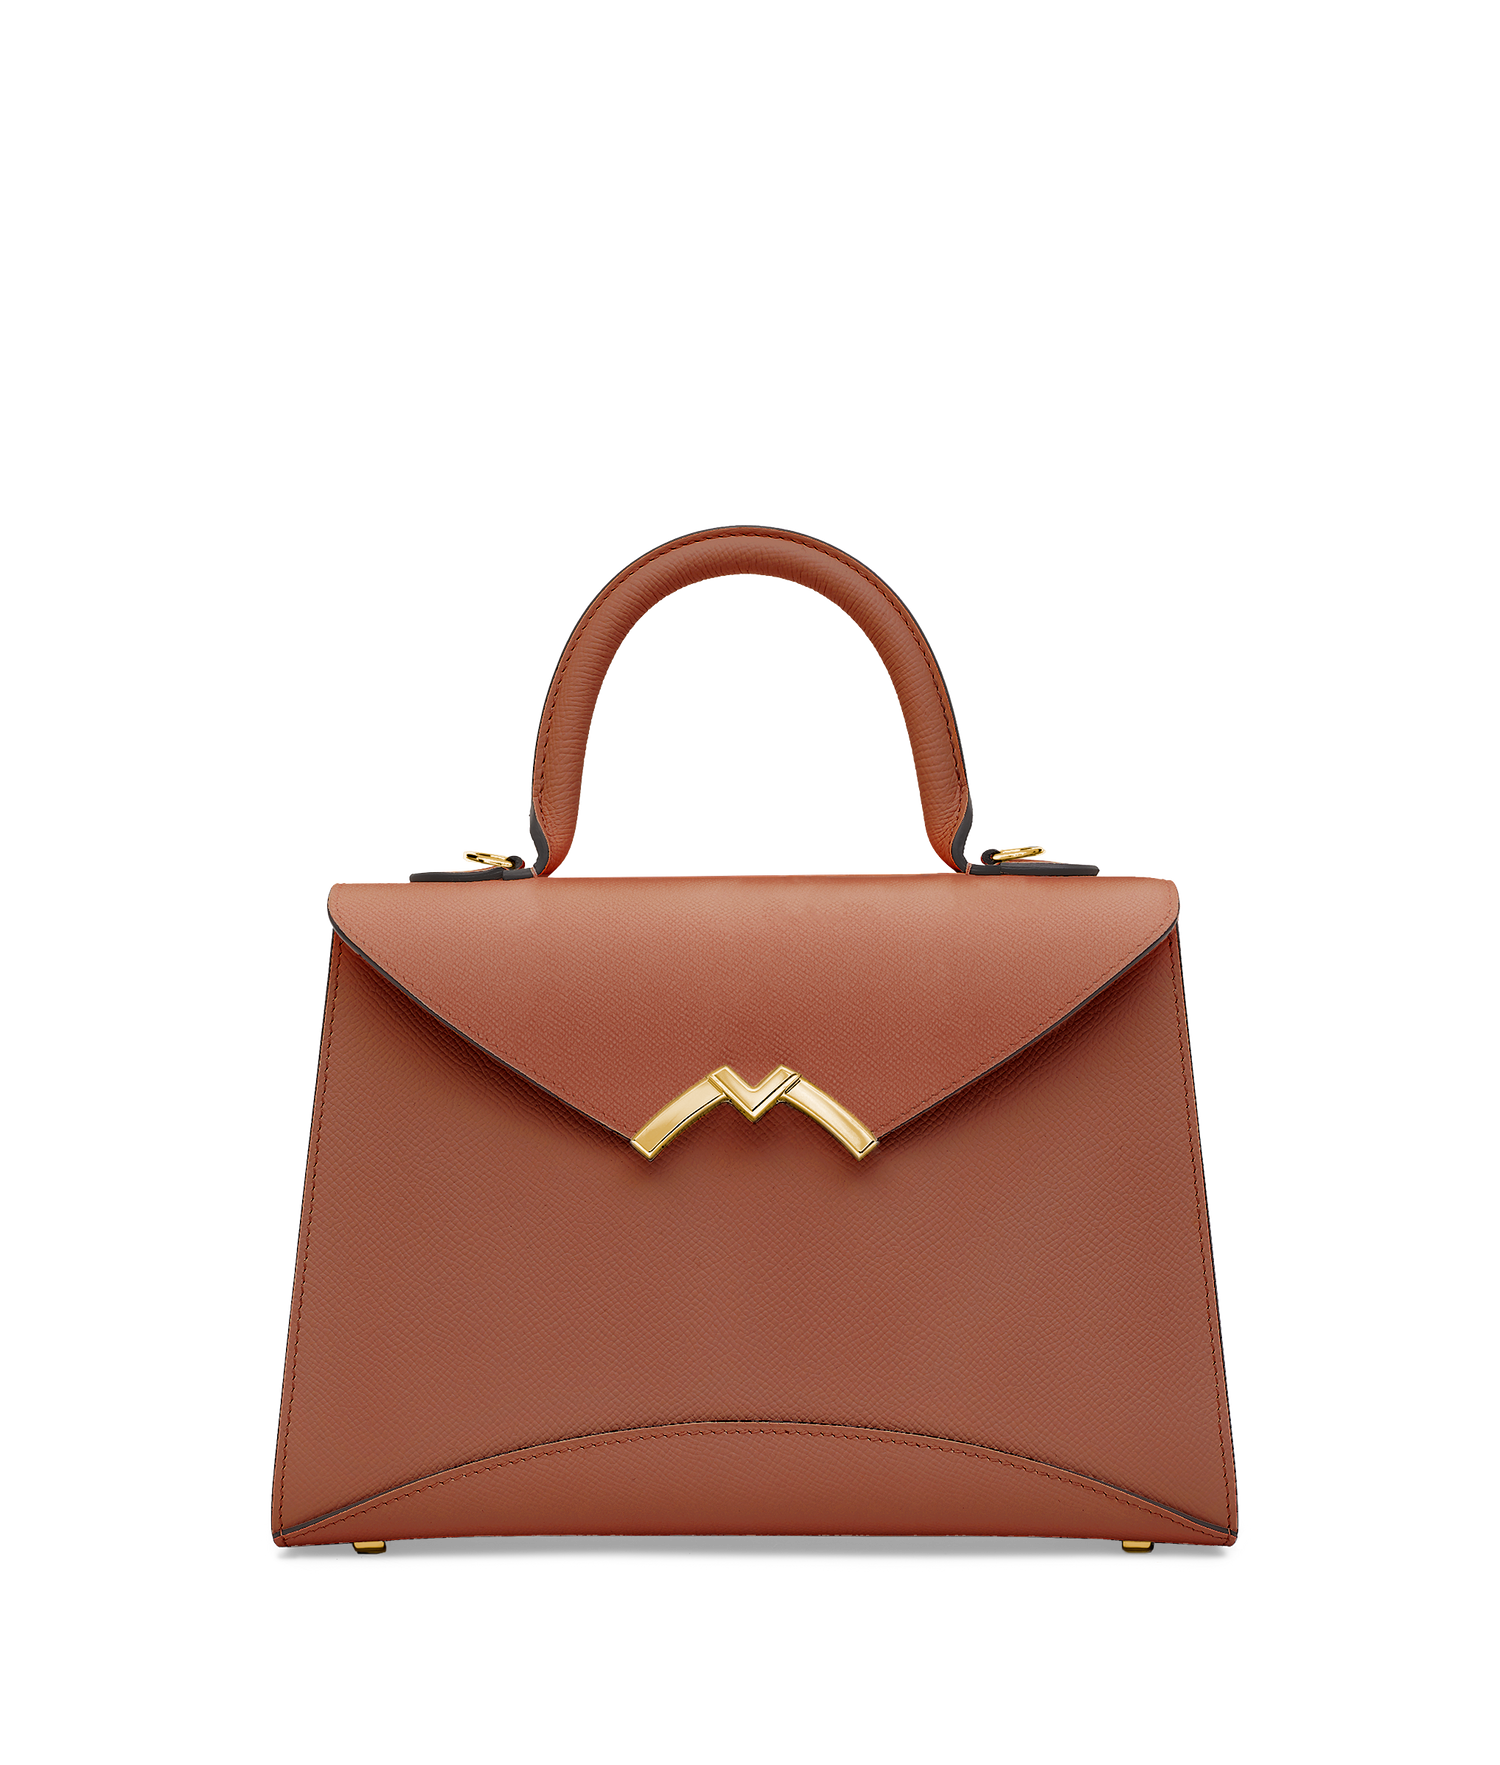 moynat's Gabrielle BB in canvas and leather takes over 20 hours to